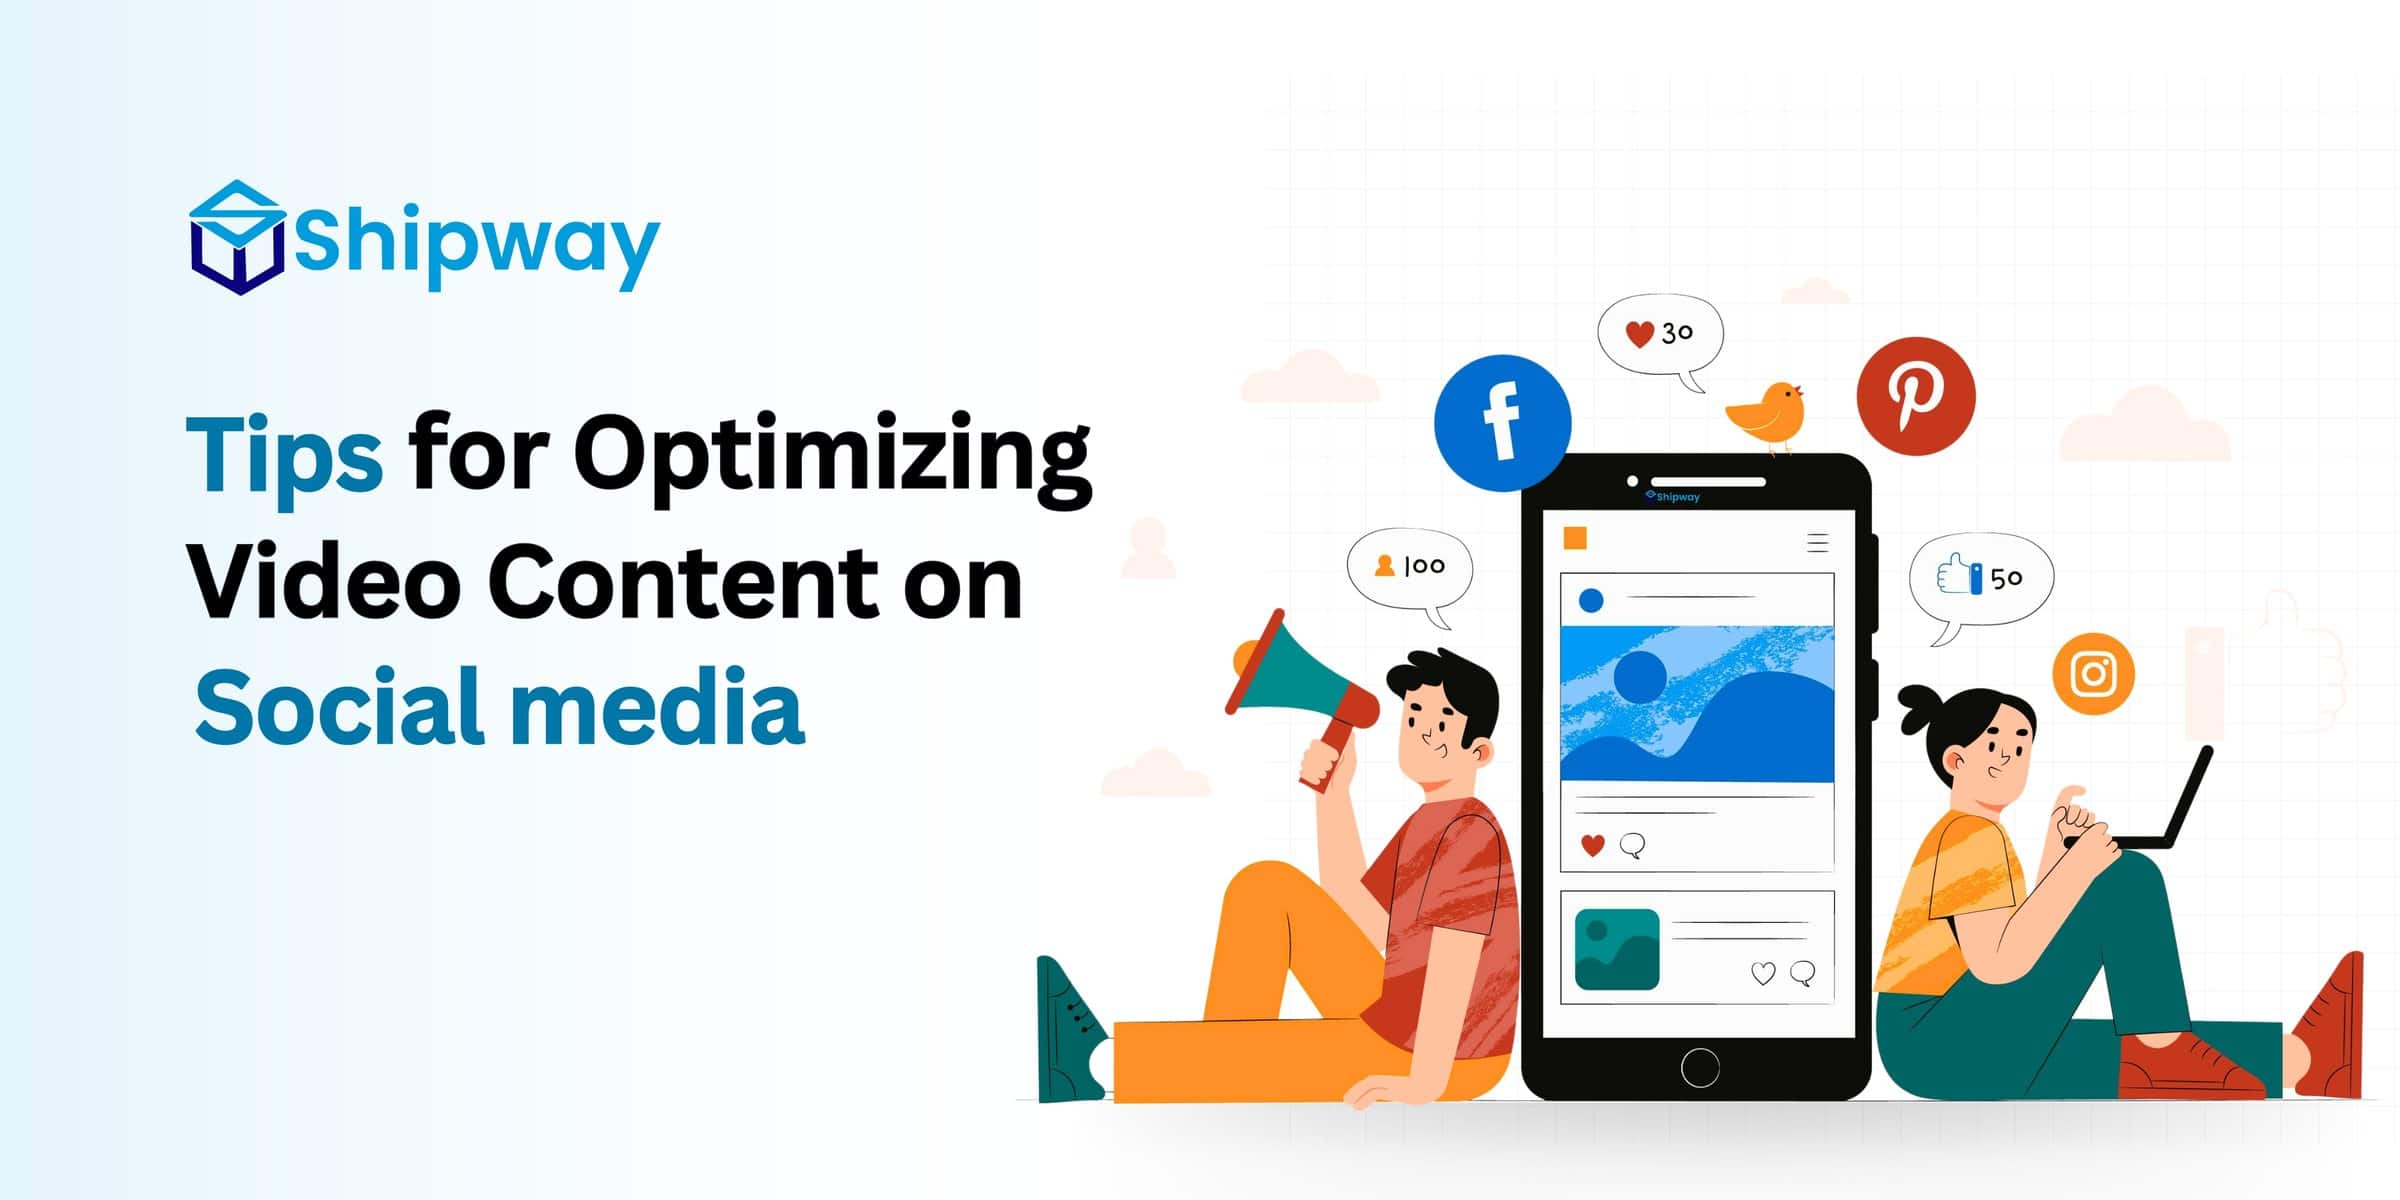 7 Proven Tips for Optimizing Video Content on Social Media Platforms